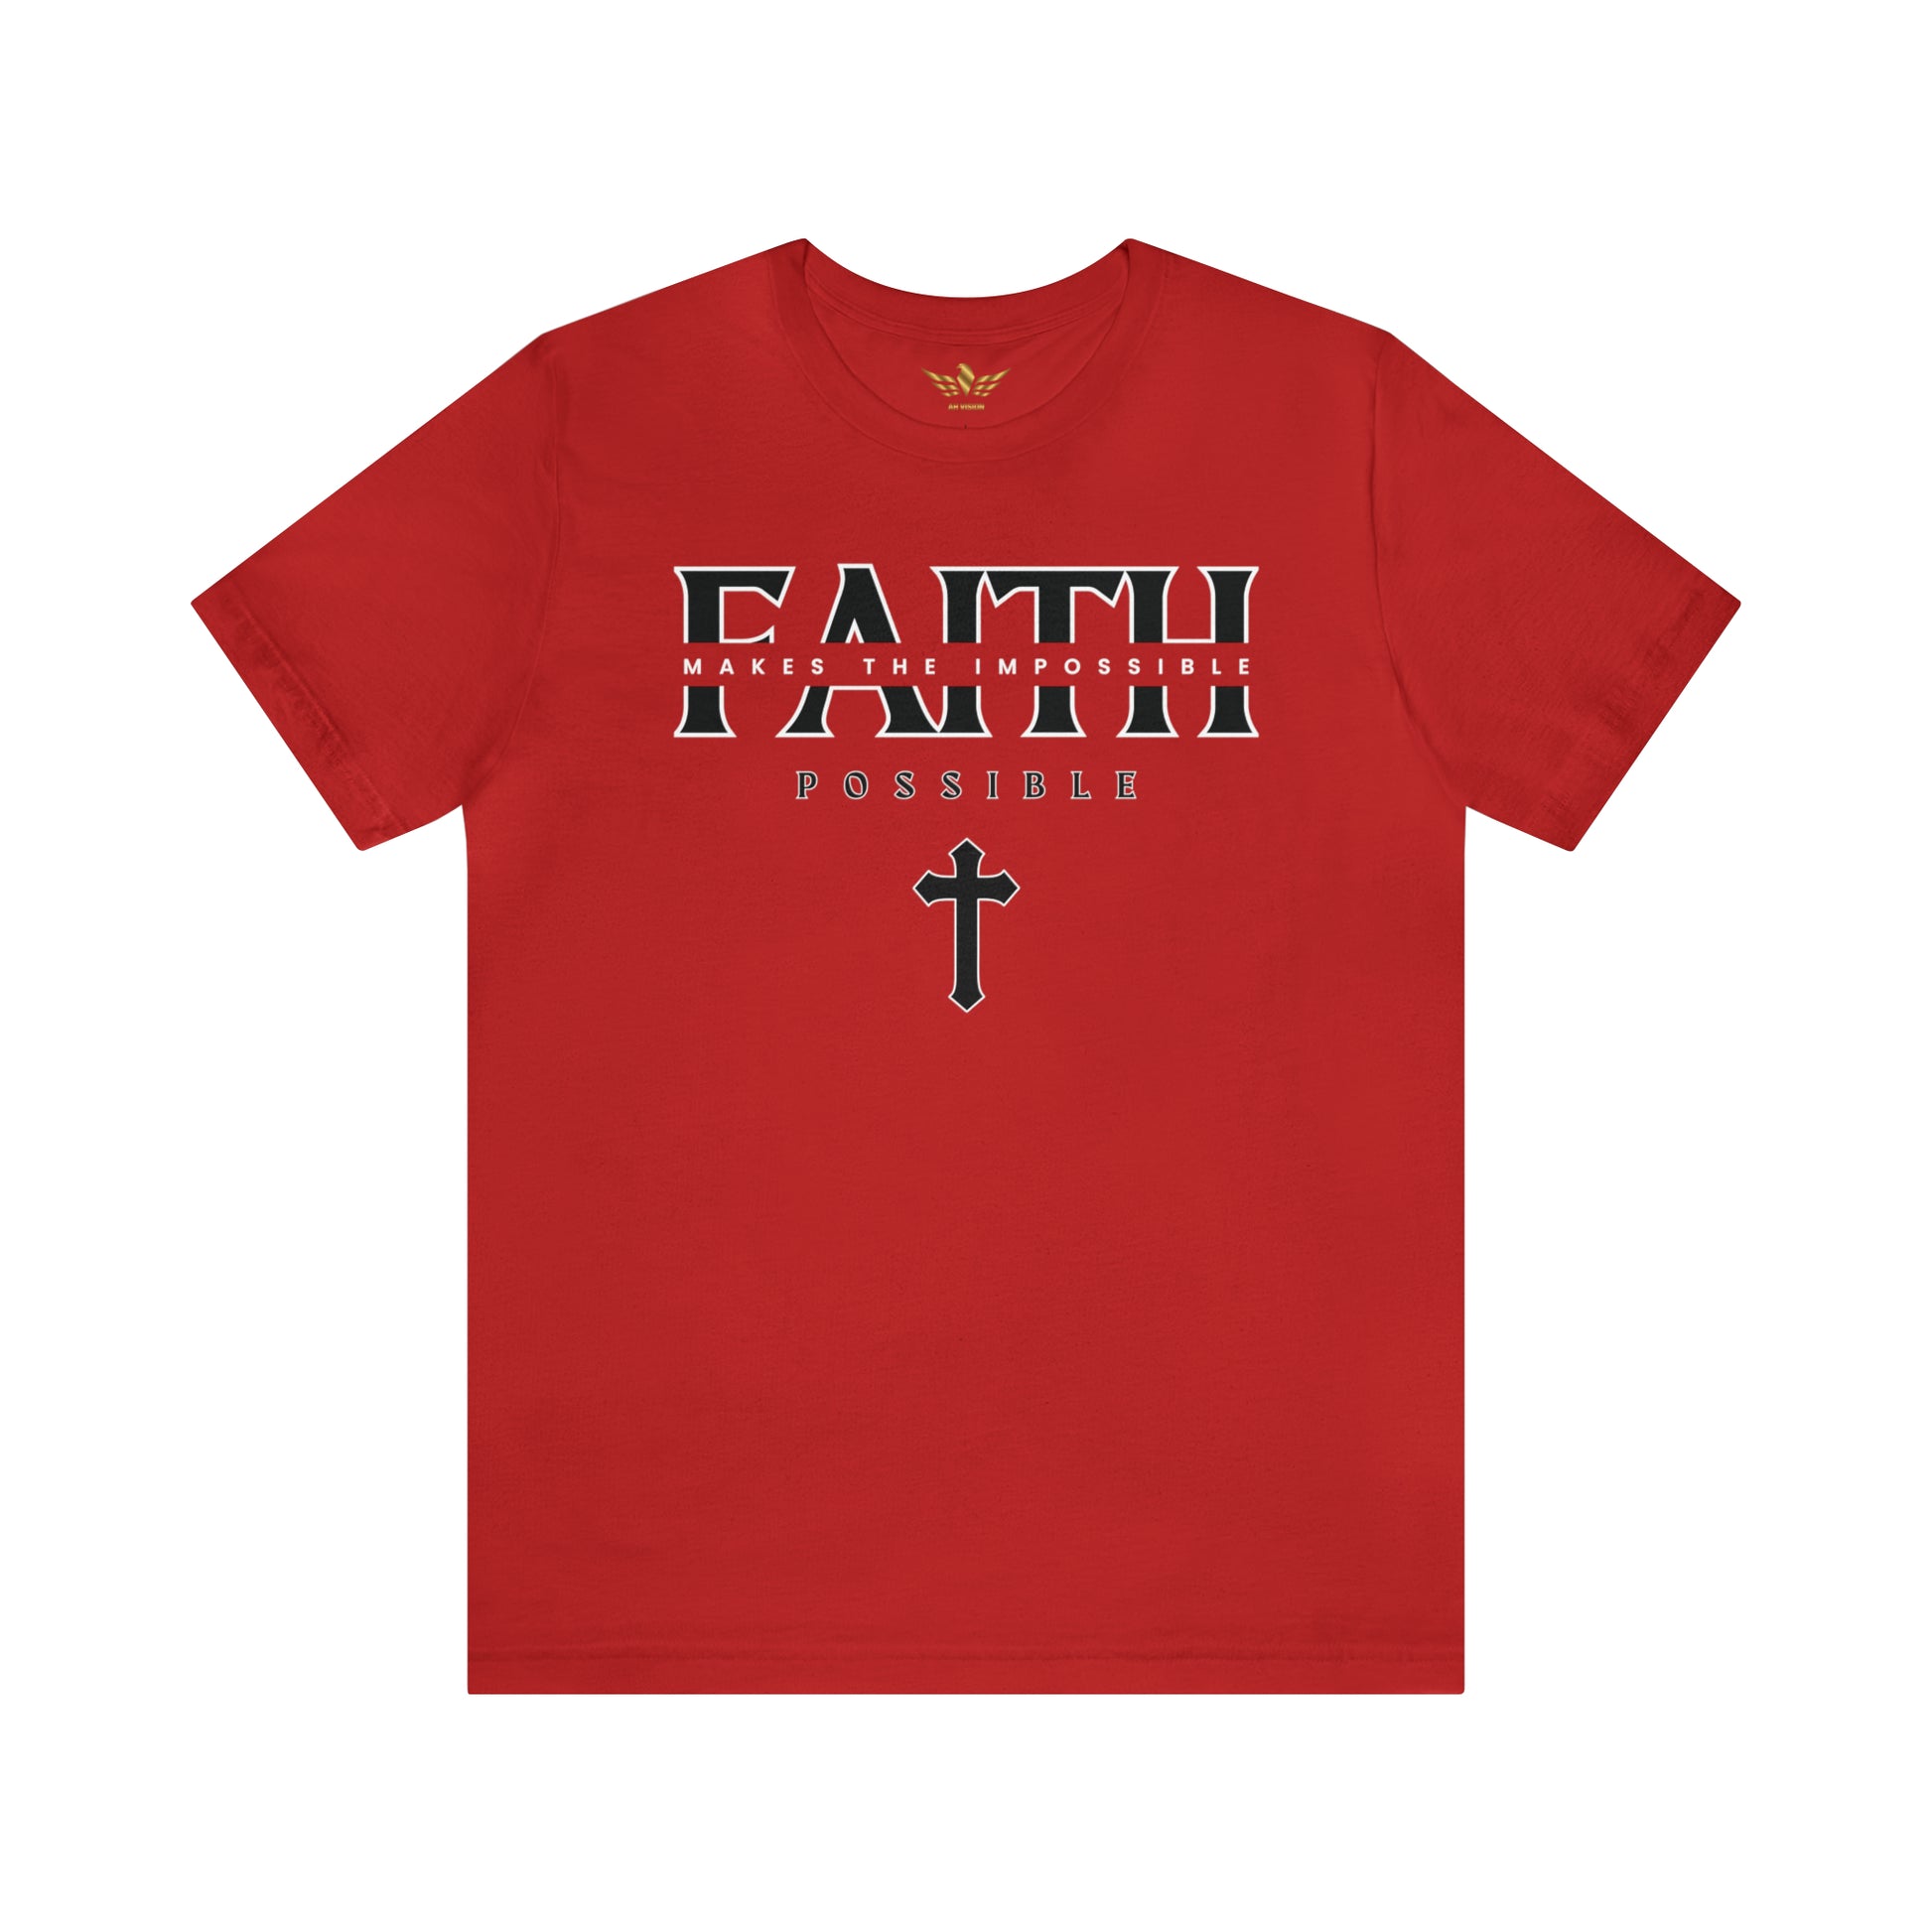 Faith Makes The Impossible Possible Unisex Tee - AH VISION